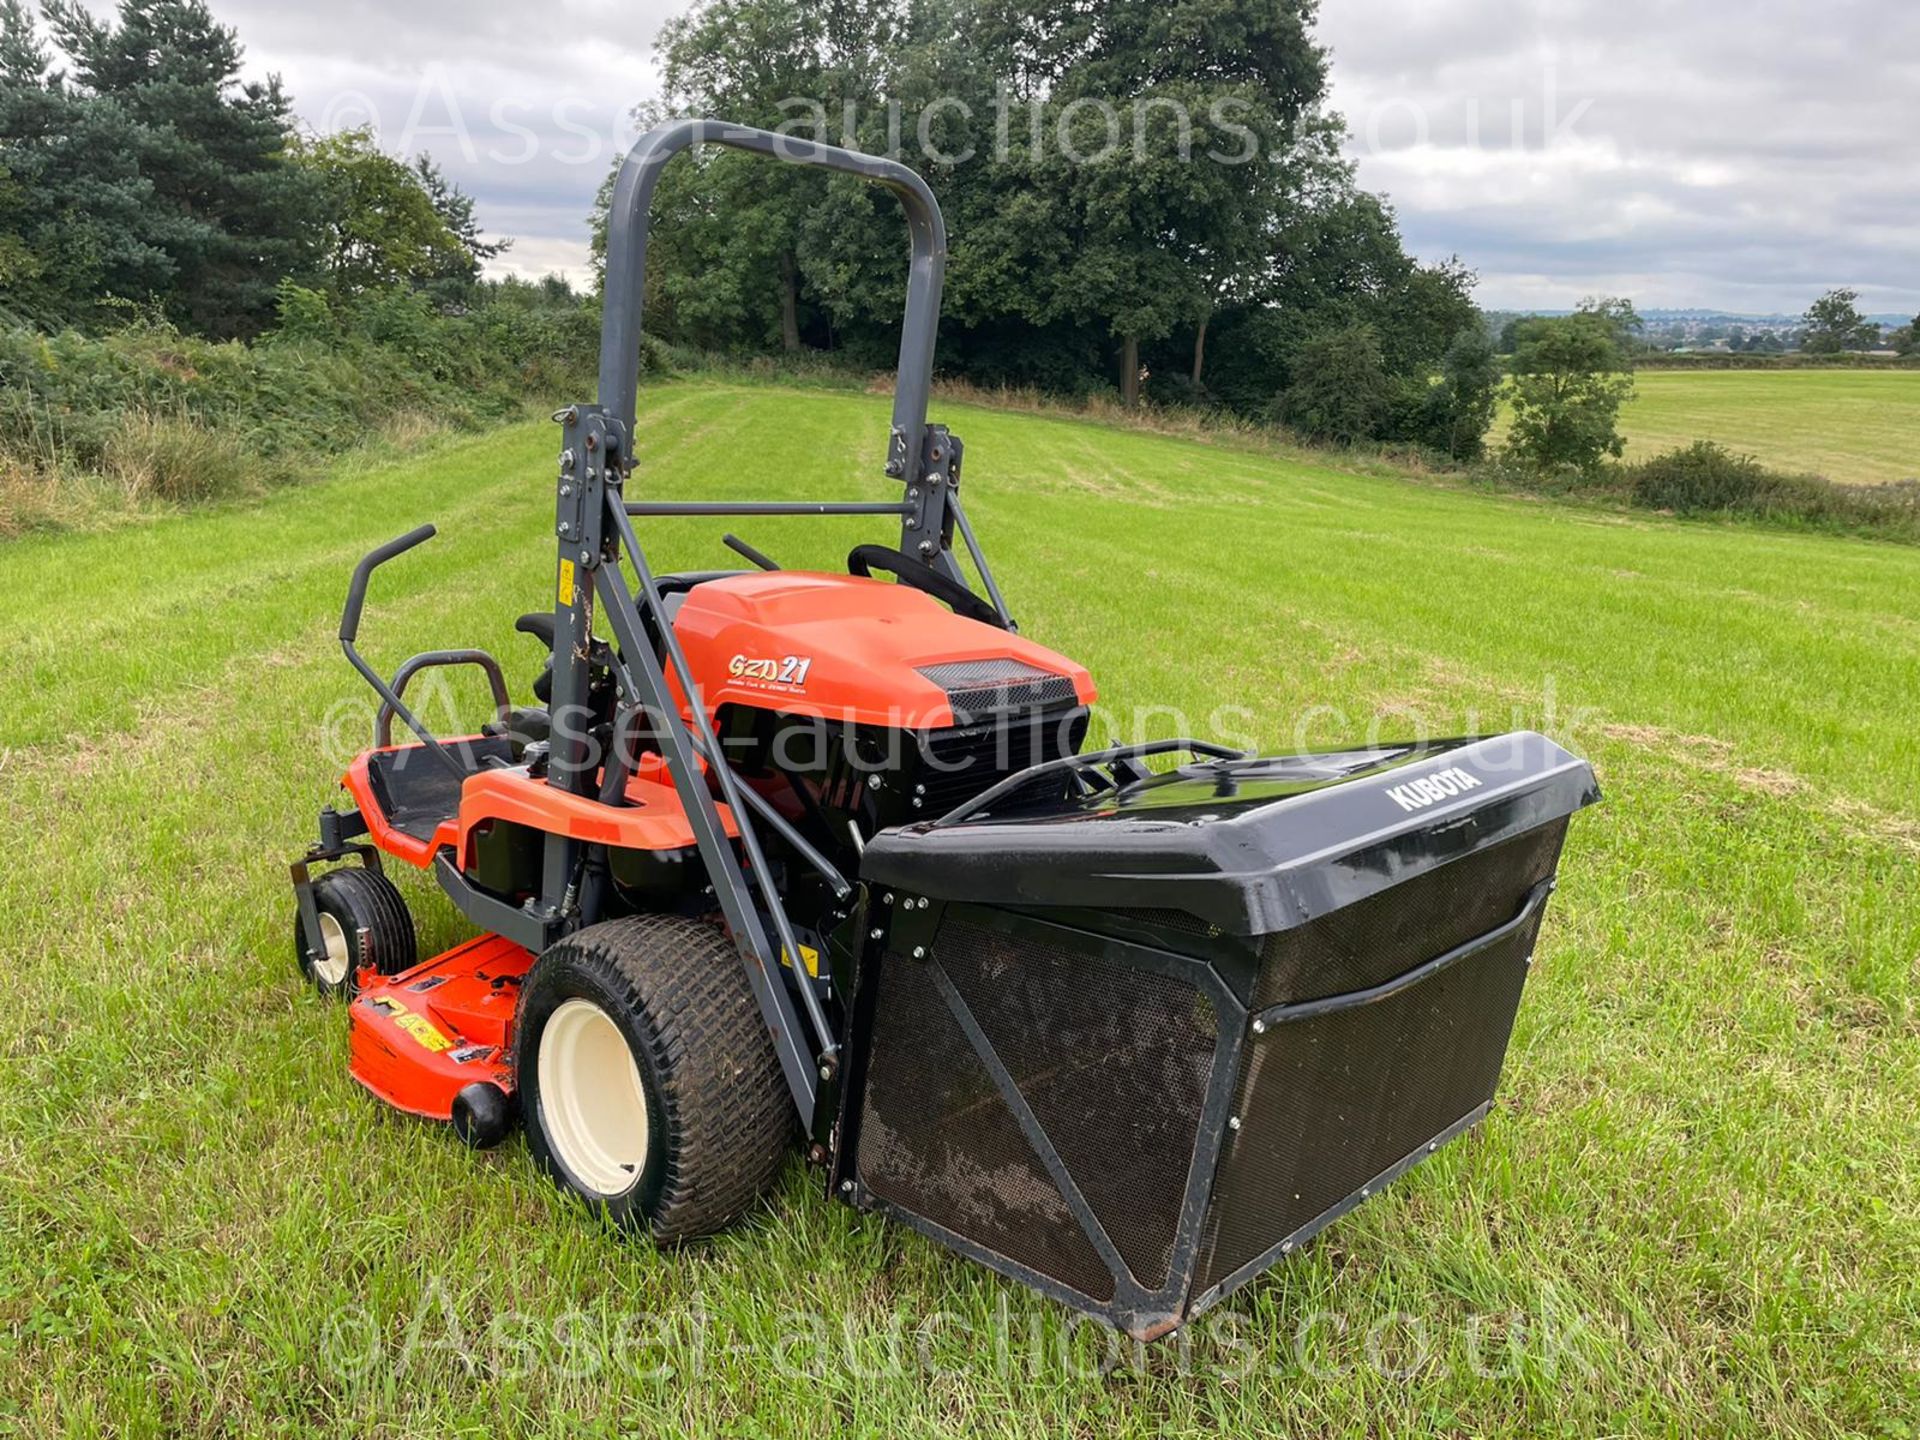 2015 KUBOTA GZD21 HIGH TIP ZERO TURN MOWER, RUNS, DRIVES CUTS AND COLLECTS WELL *PLUS VAT* - Image 4 of 13